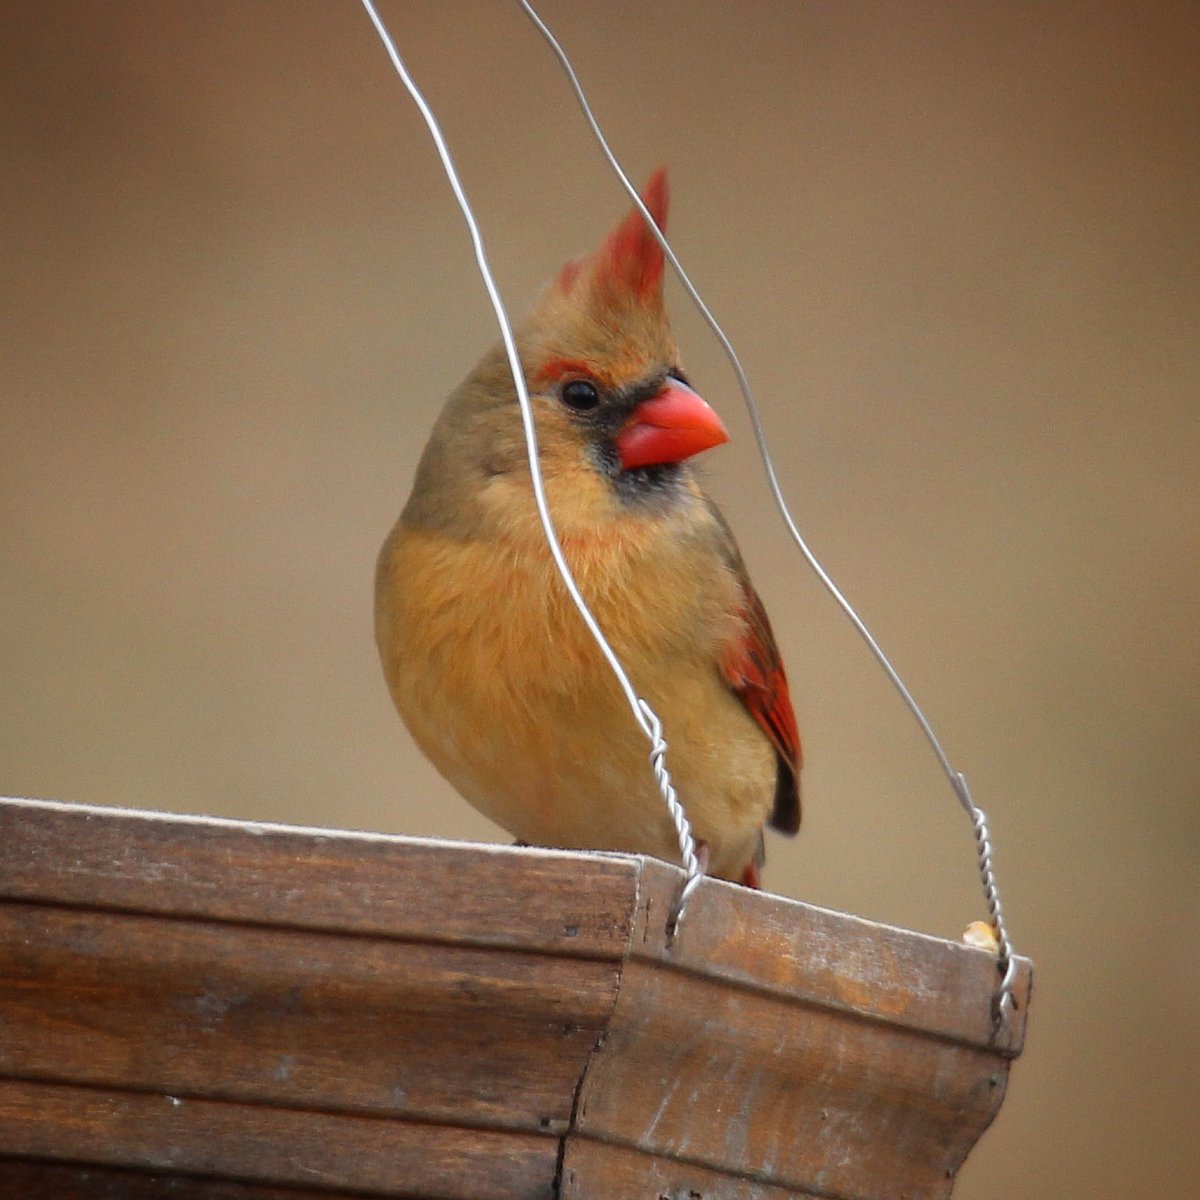 Mrs. Cardinal looks absolutely stunning today!
#mrscardinal #cardinal #cardinals #femalecardinal #ohiobirdworld #ohiobirdlovers #ohiobirding #ohiobirdlife #beavercreekohio #beavercreek #beavercreekbirding